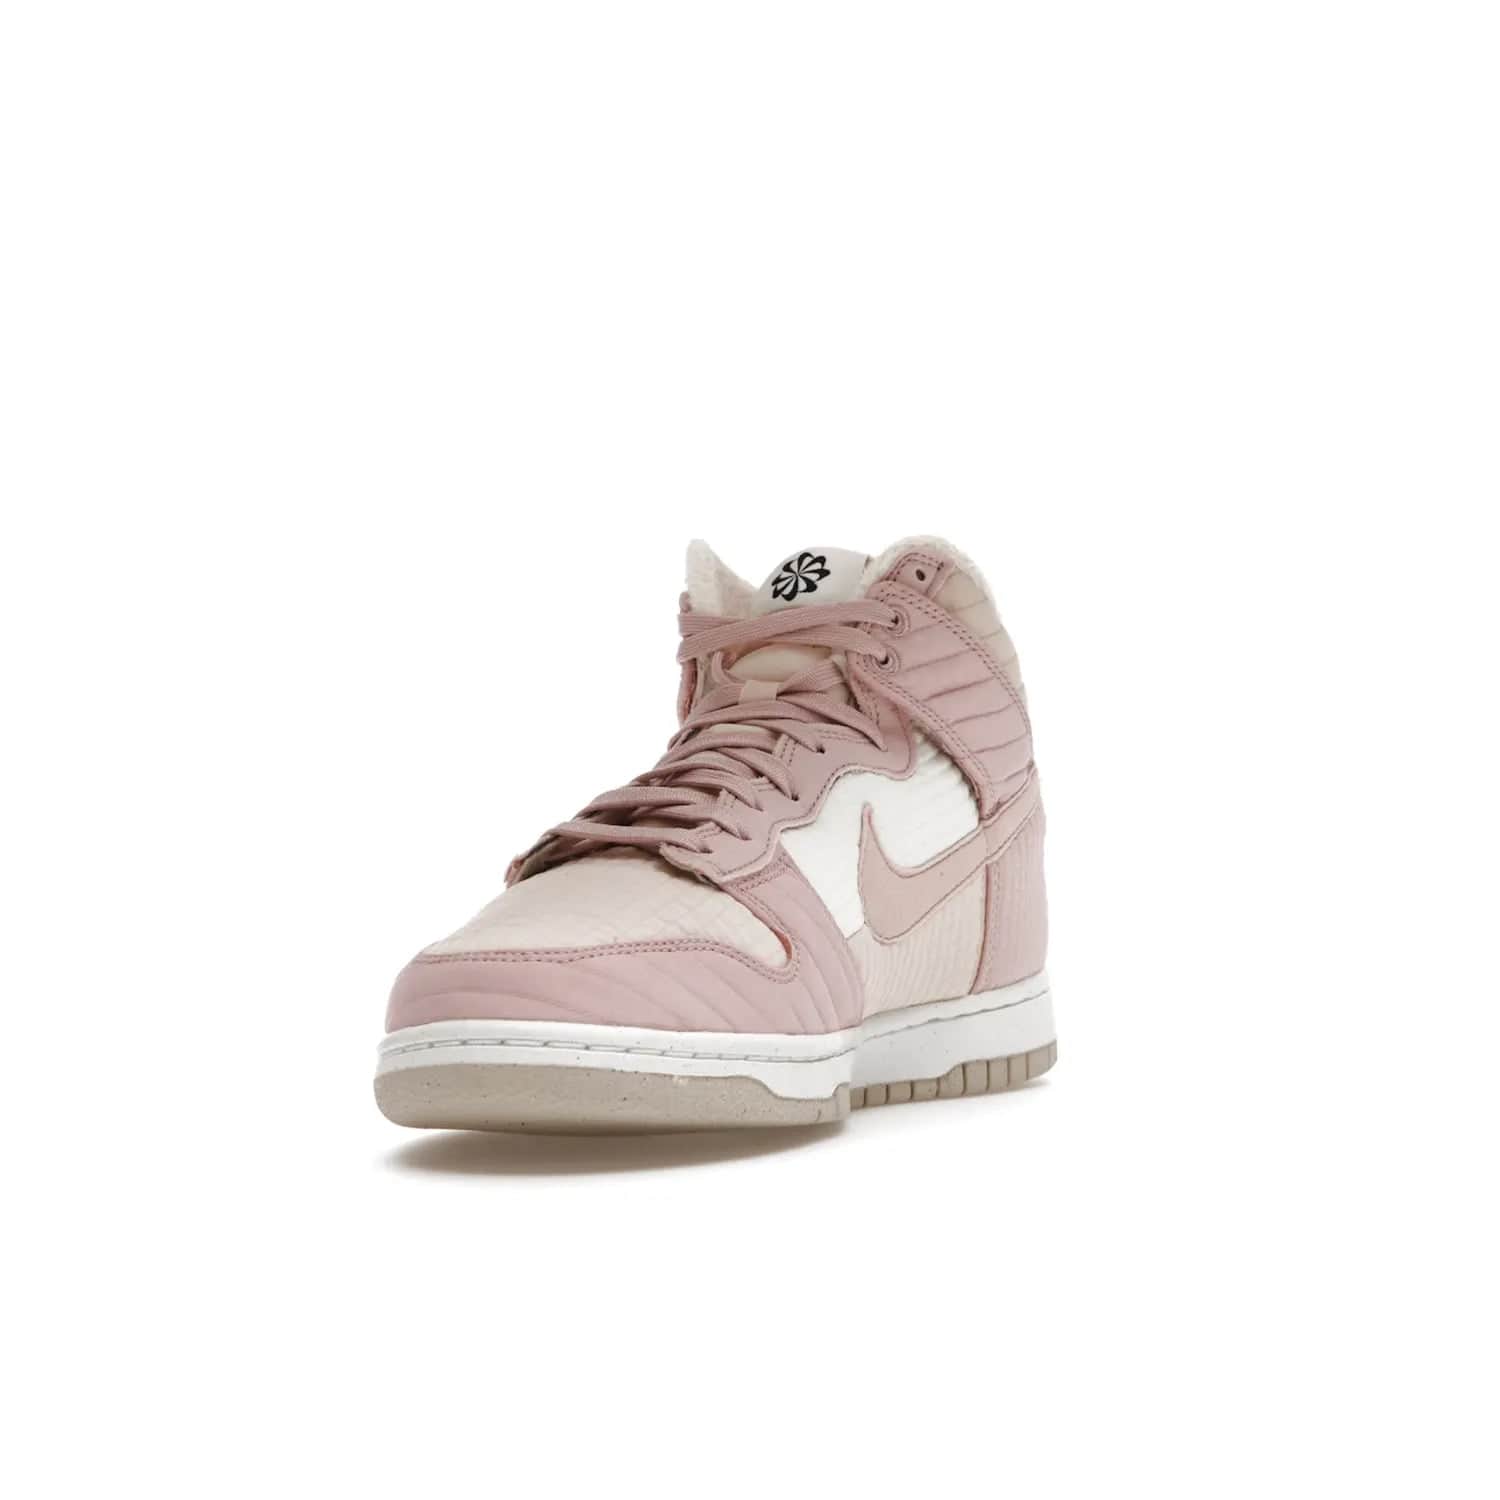 Nike Dunk High LX Next Nature Pink Oxford (Women's) - Image 13 - Only at www.BallersClubKickz.com - Cozy up in the Nike Dunk High LX Next Nature Pink Oxford for Women. Quilted upper, white midsole, soft fleece interior provide warmth and comfort for cold winter nights.